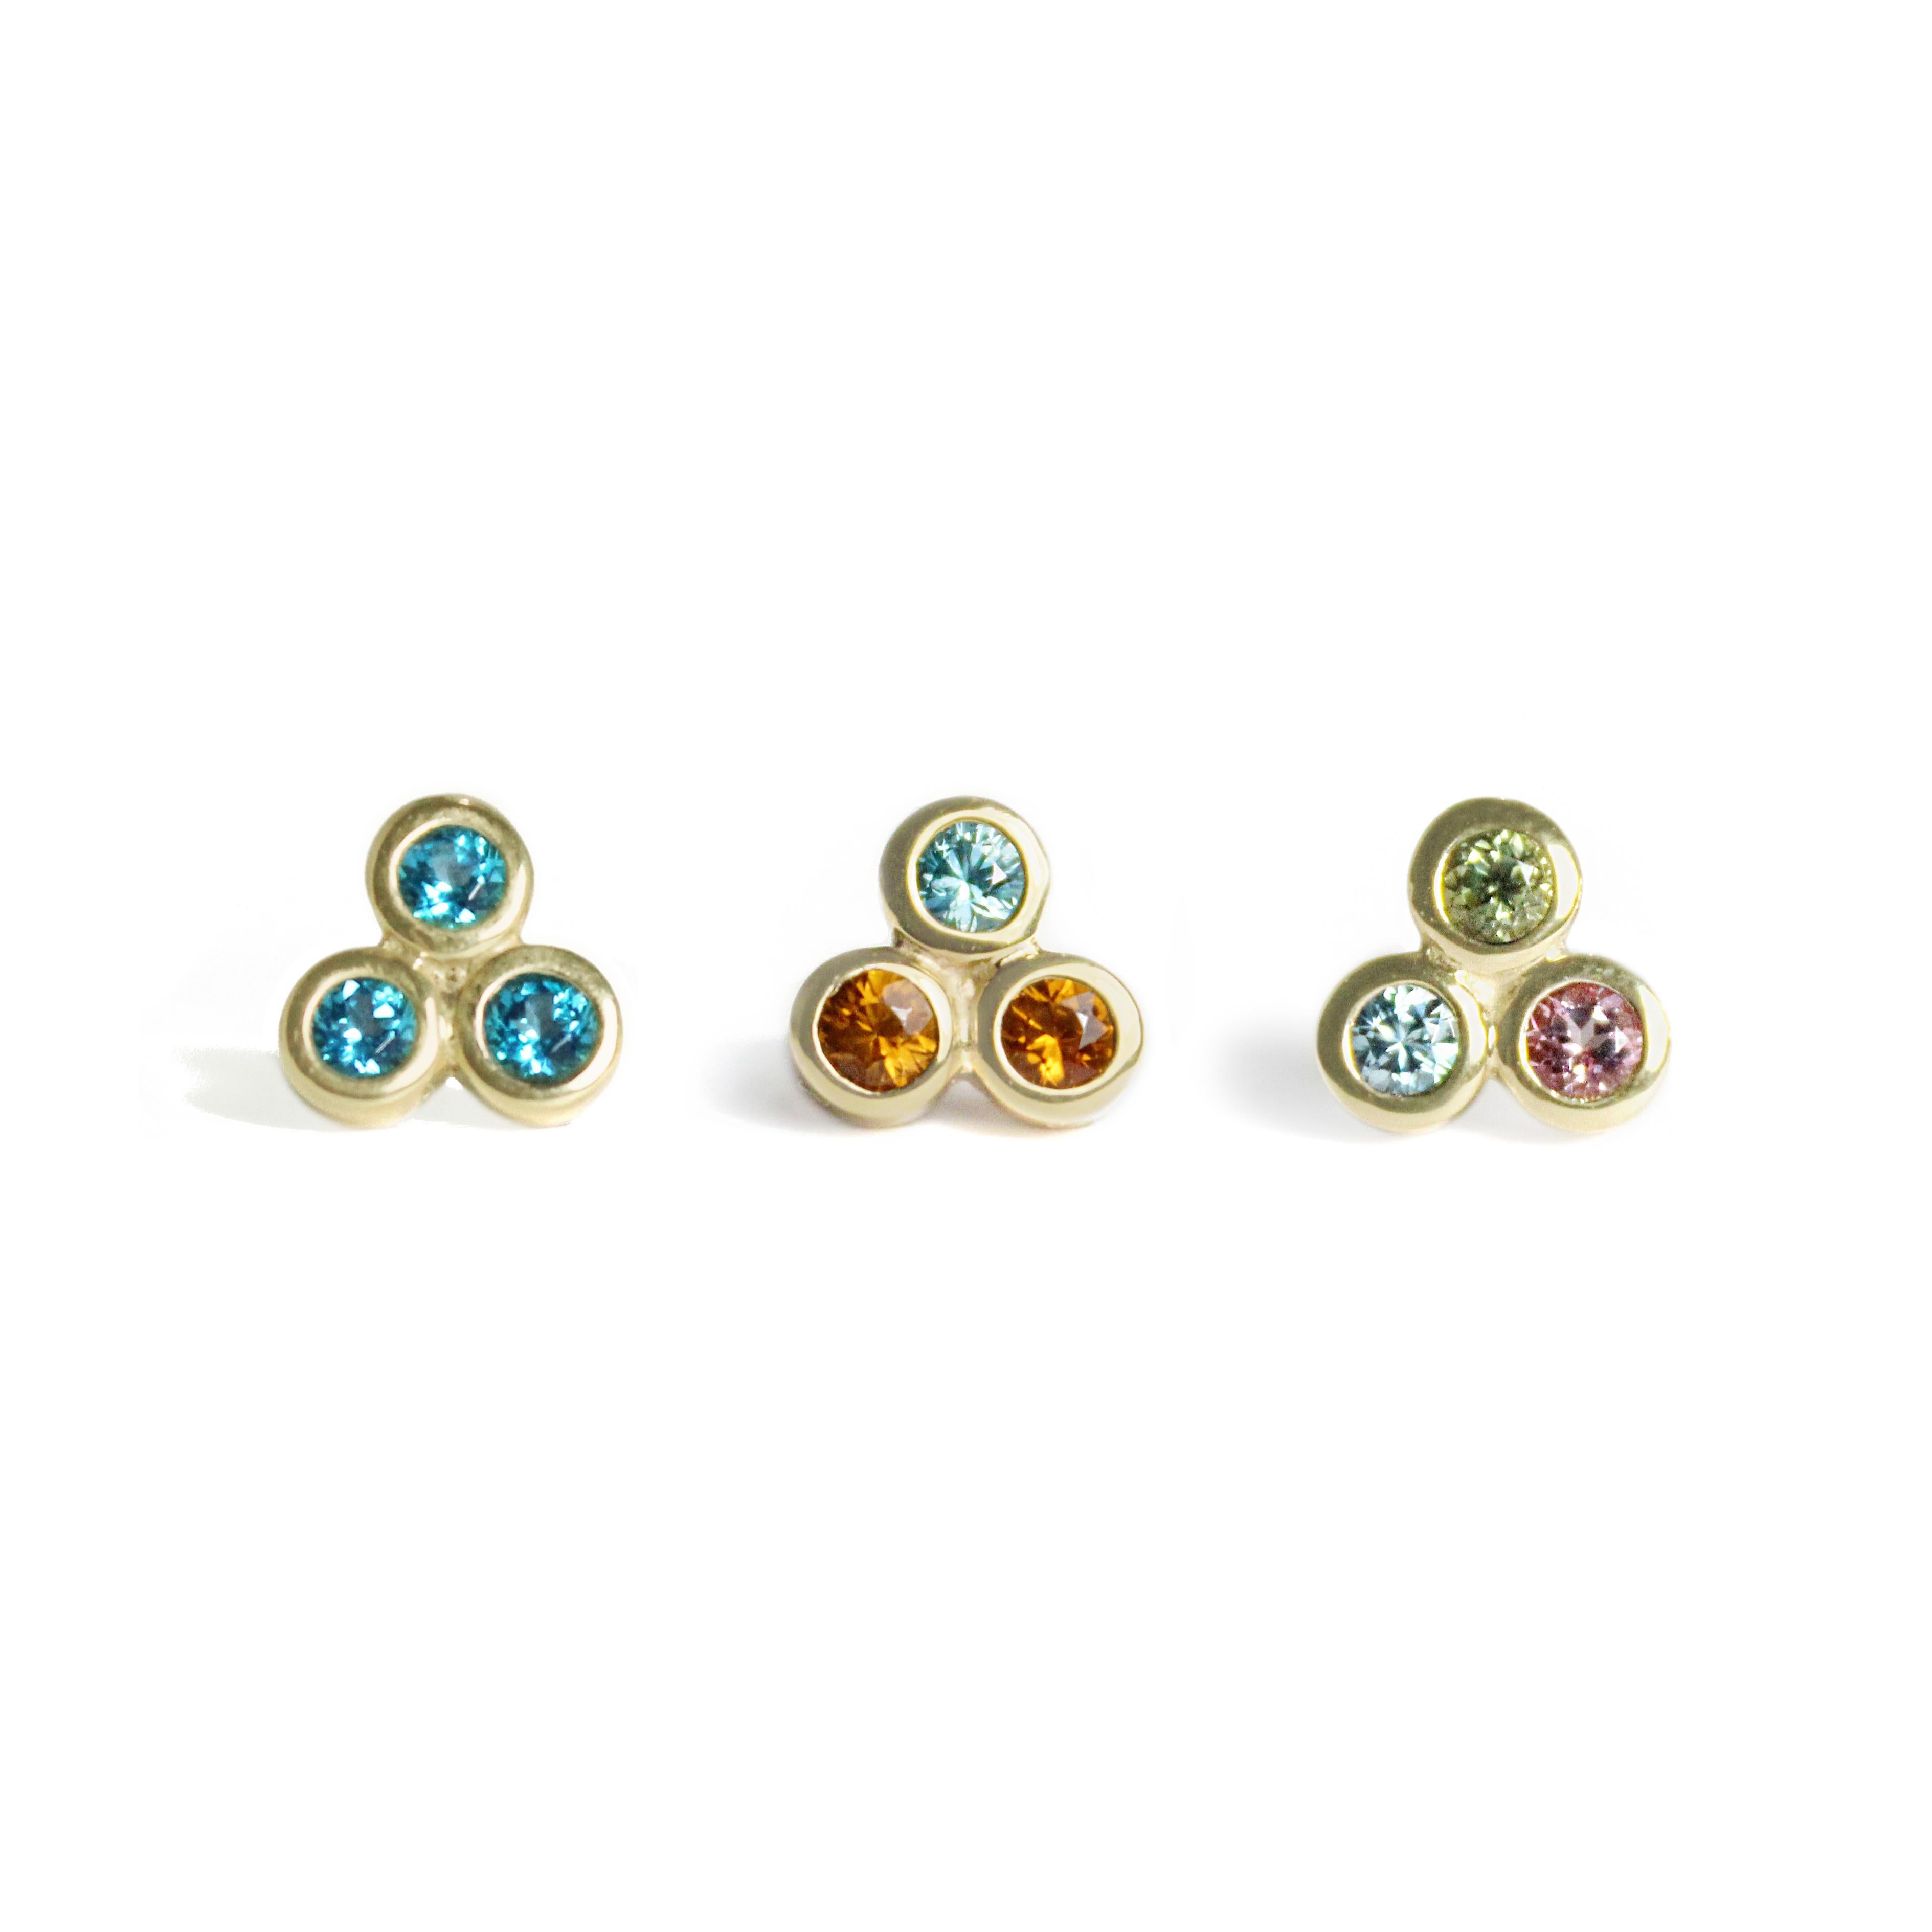 Contemporary Emily Kuvin Gold, Garnet and Zircon Stud Earrings